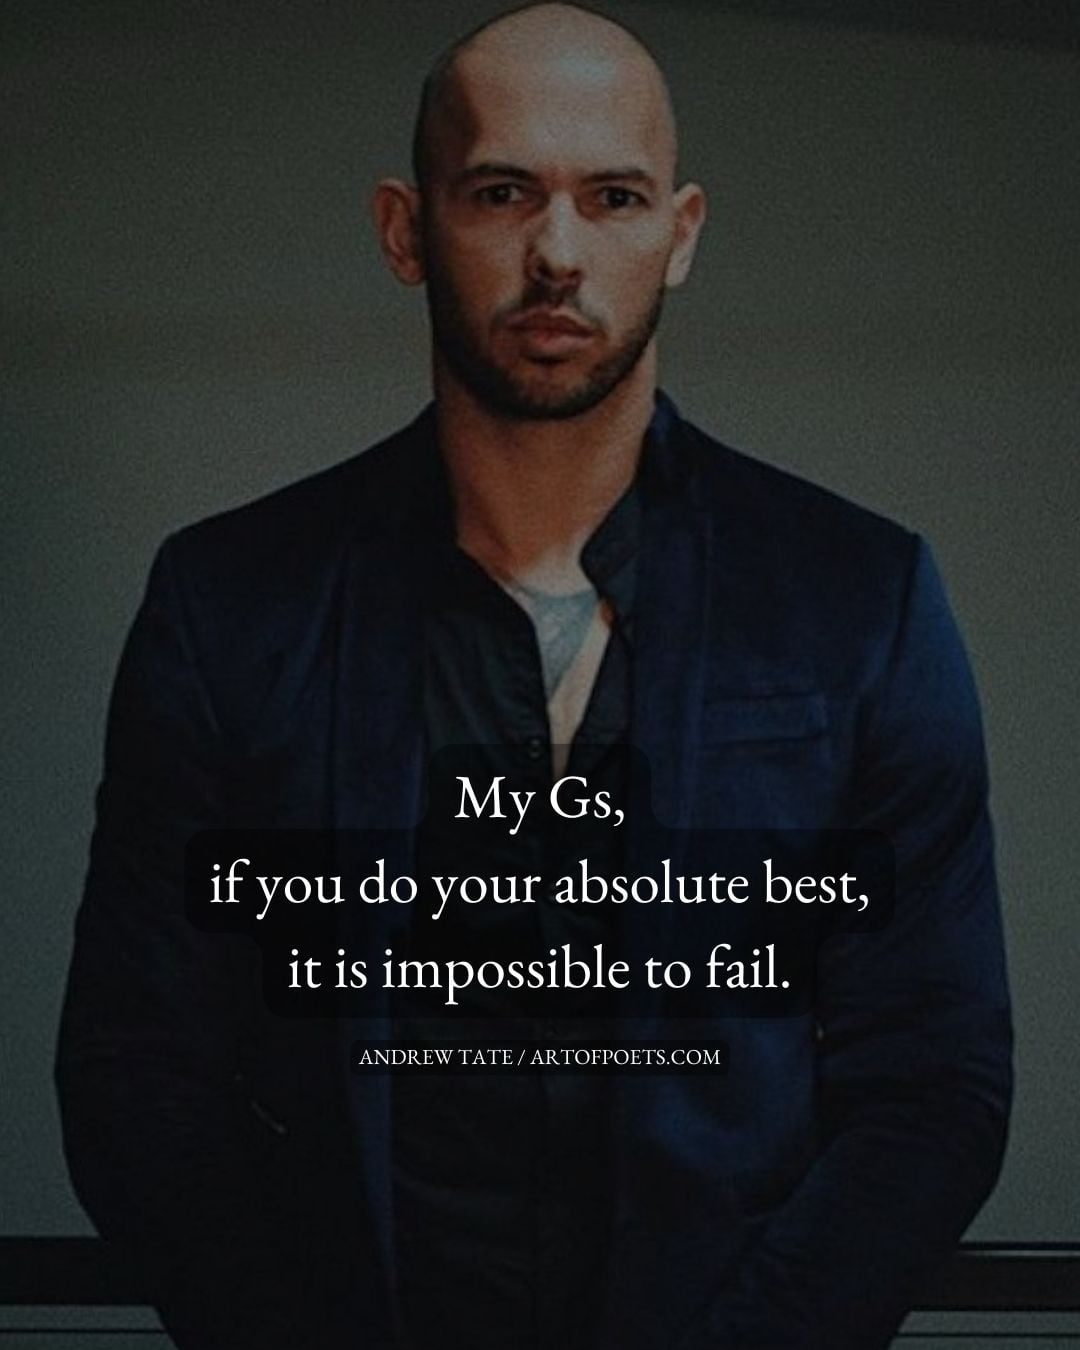 My Gs if you do your absolute best it is impossible to fail